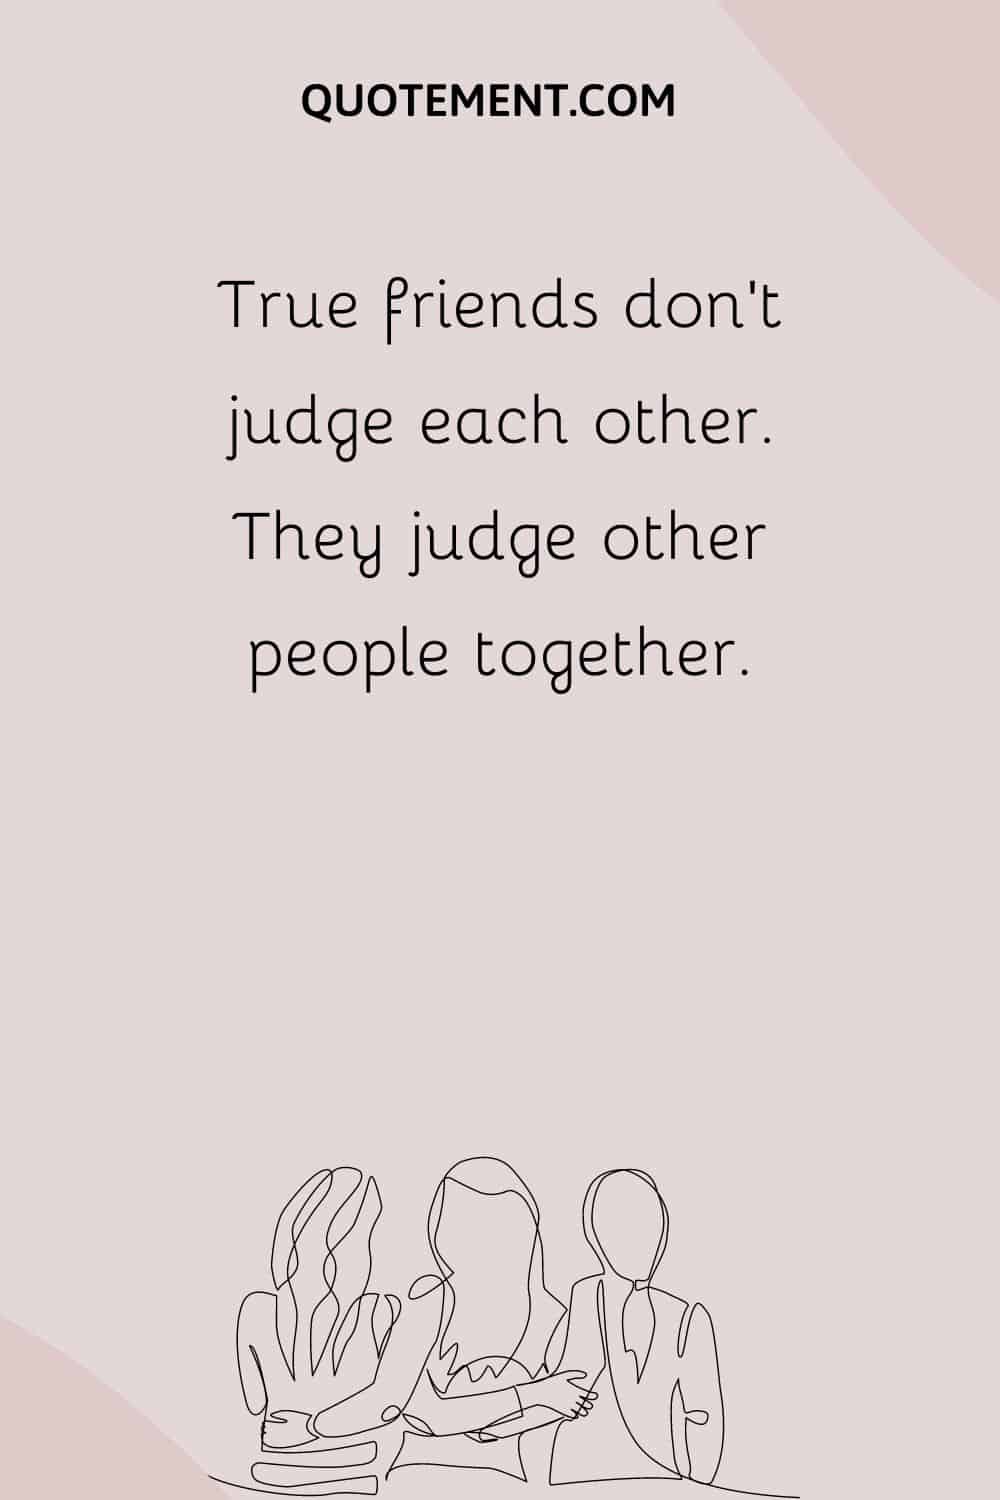 True friends don’t judge each other. They judge other people together.